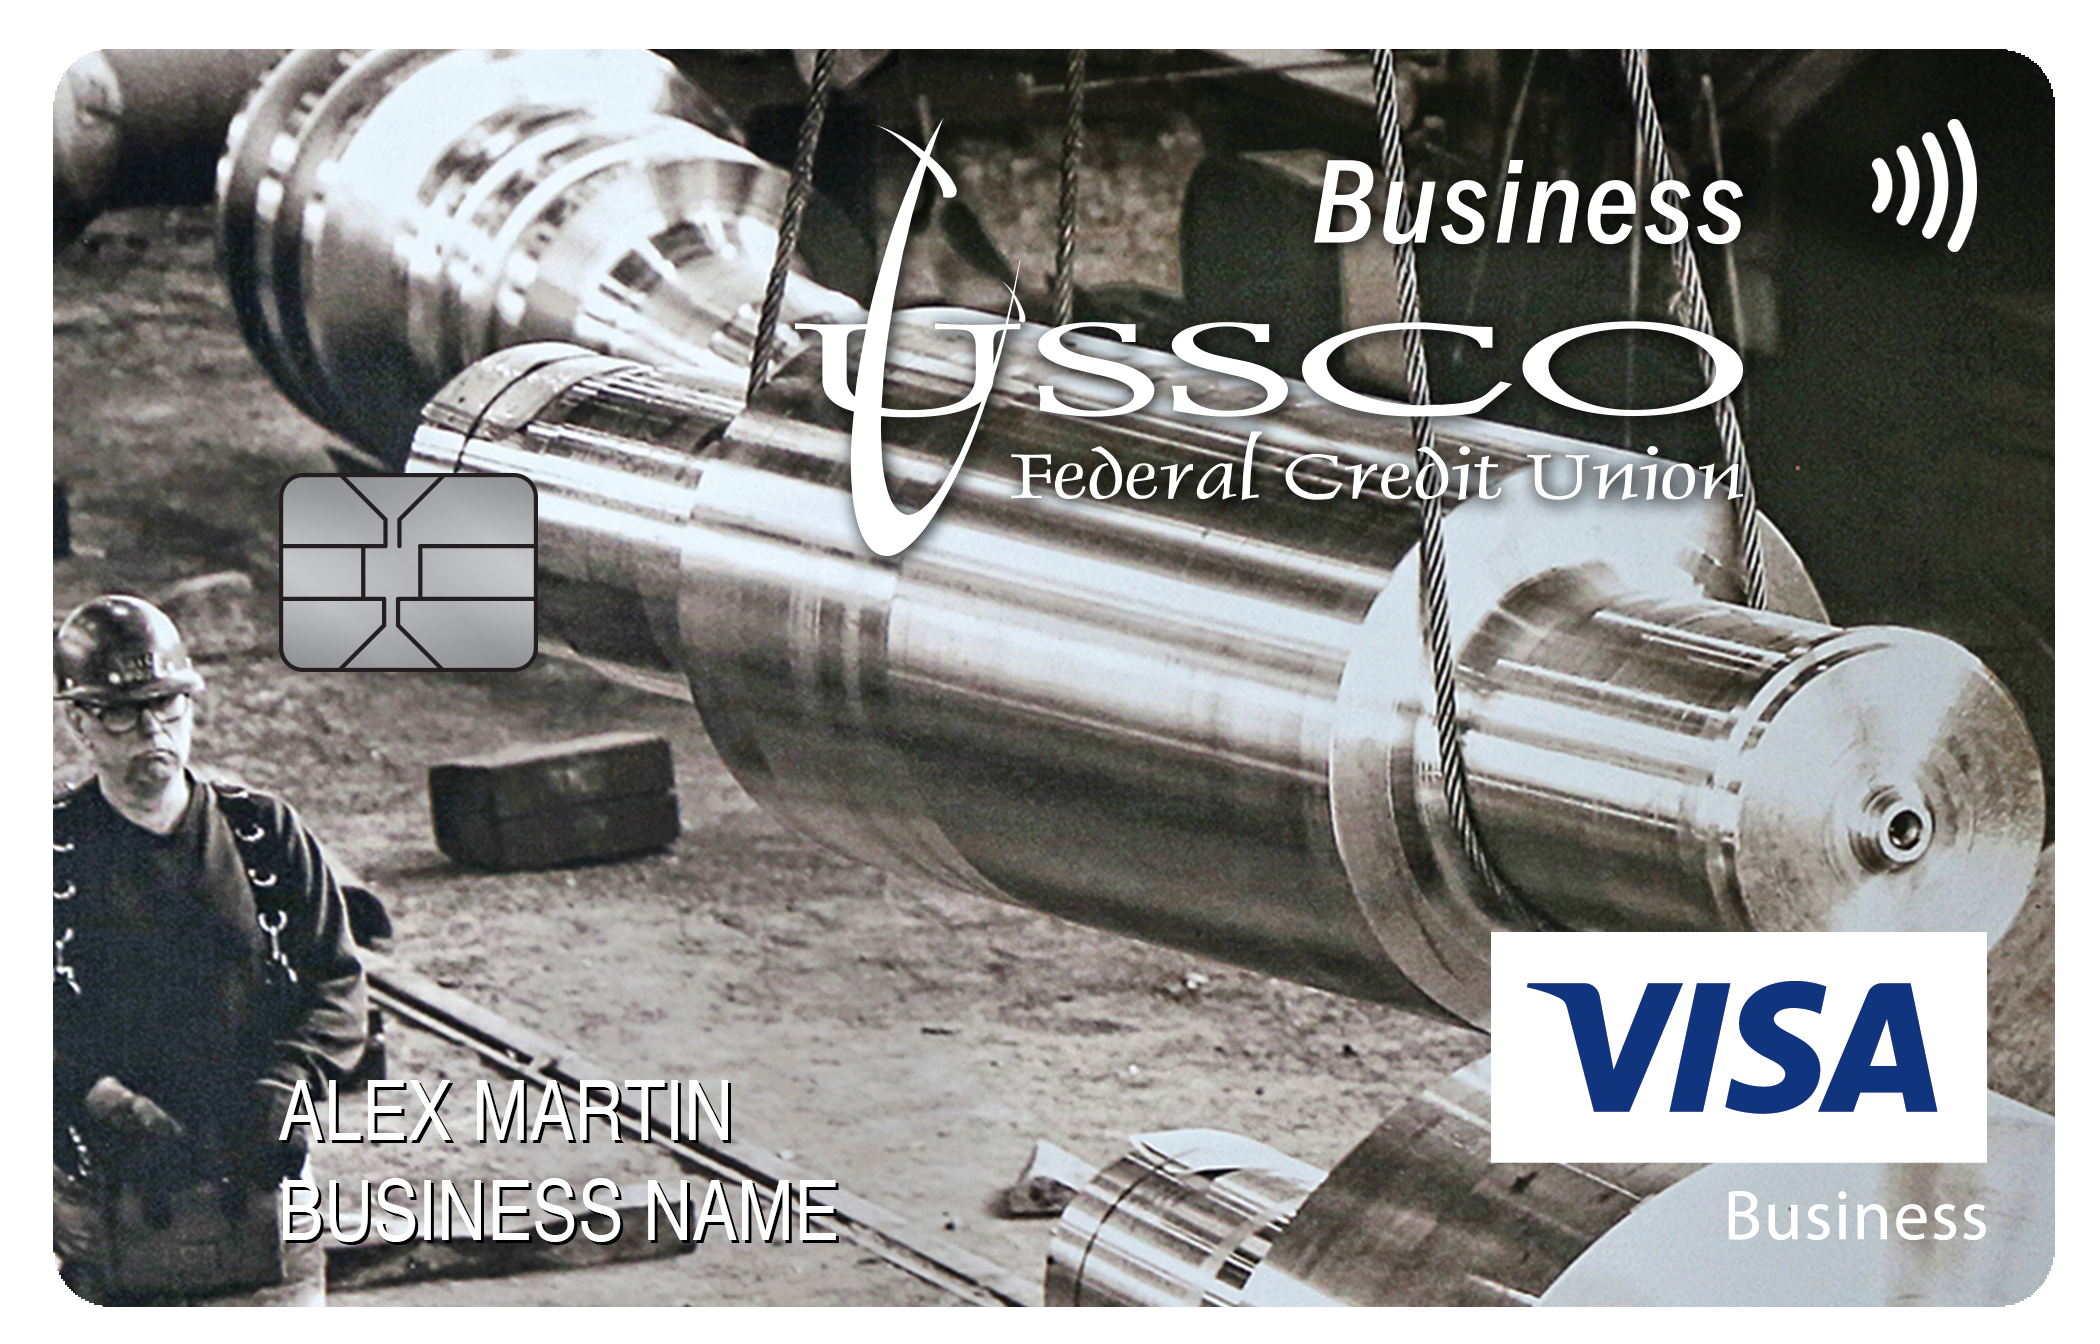 USSCO Federal Credit Union Business Cash Preferred Card